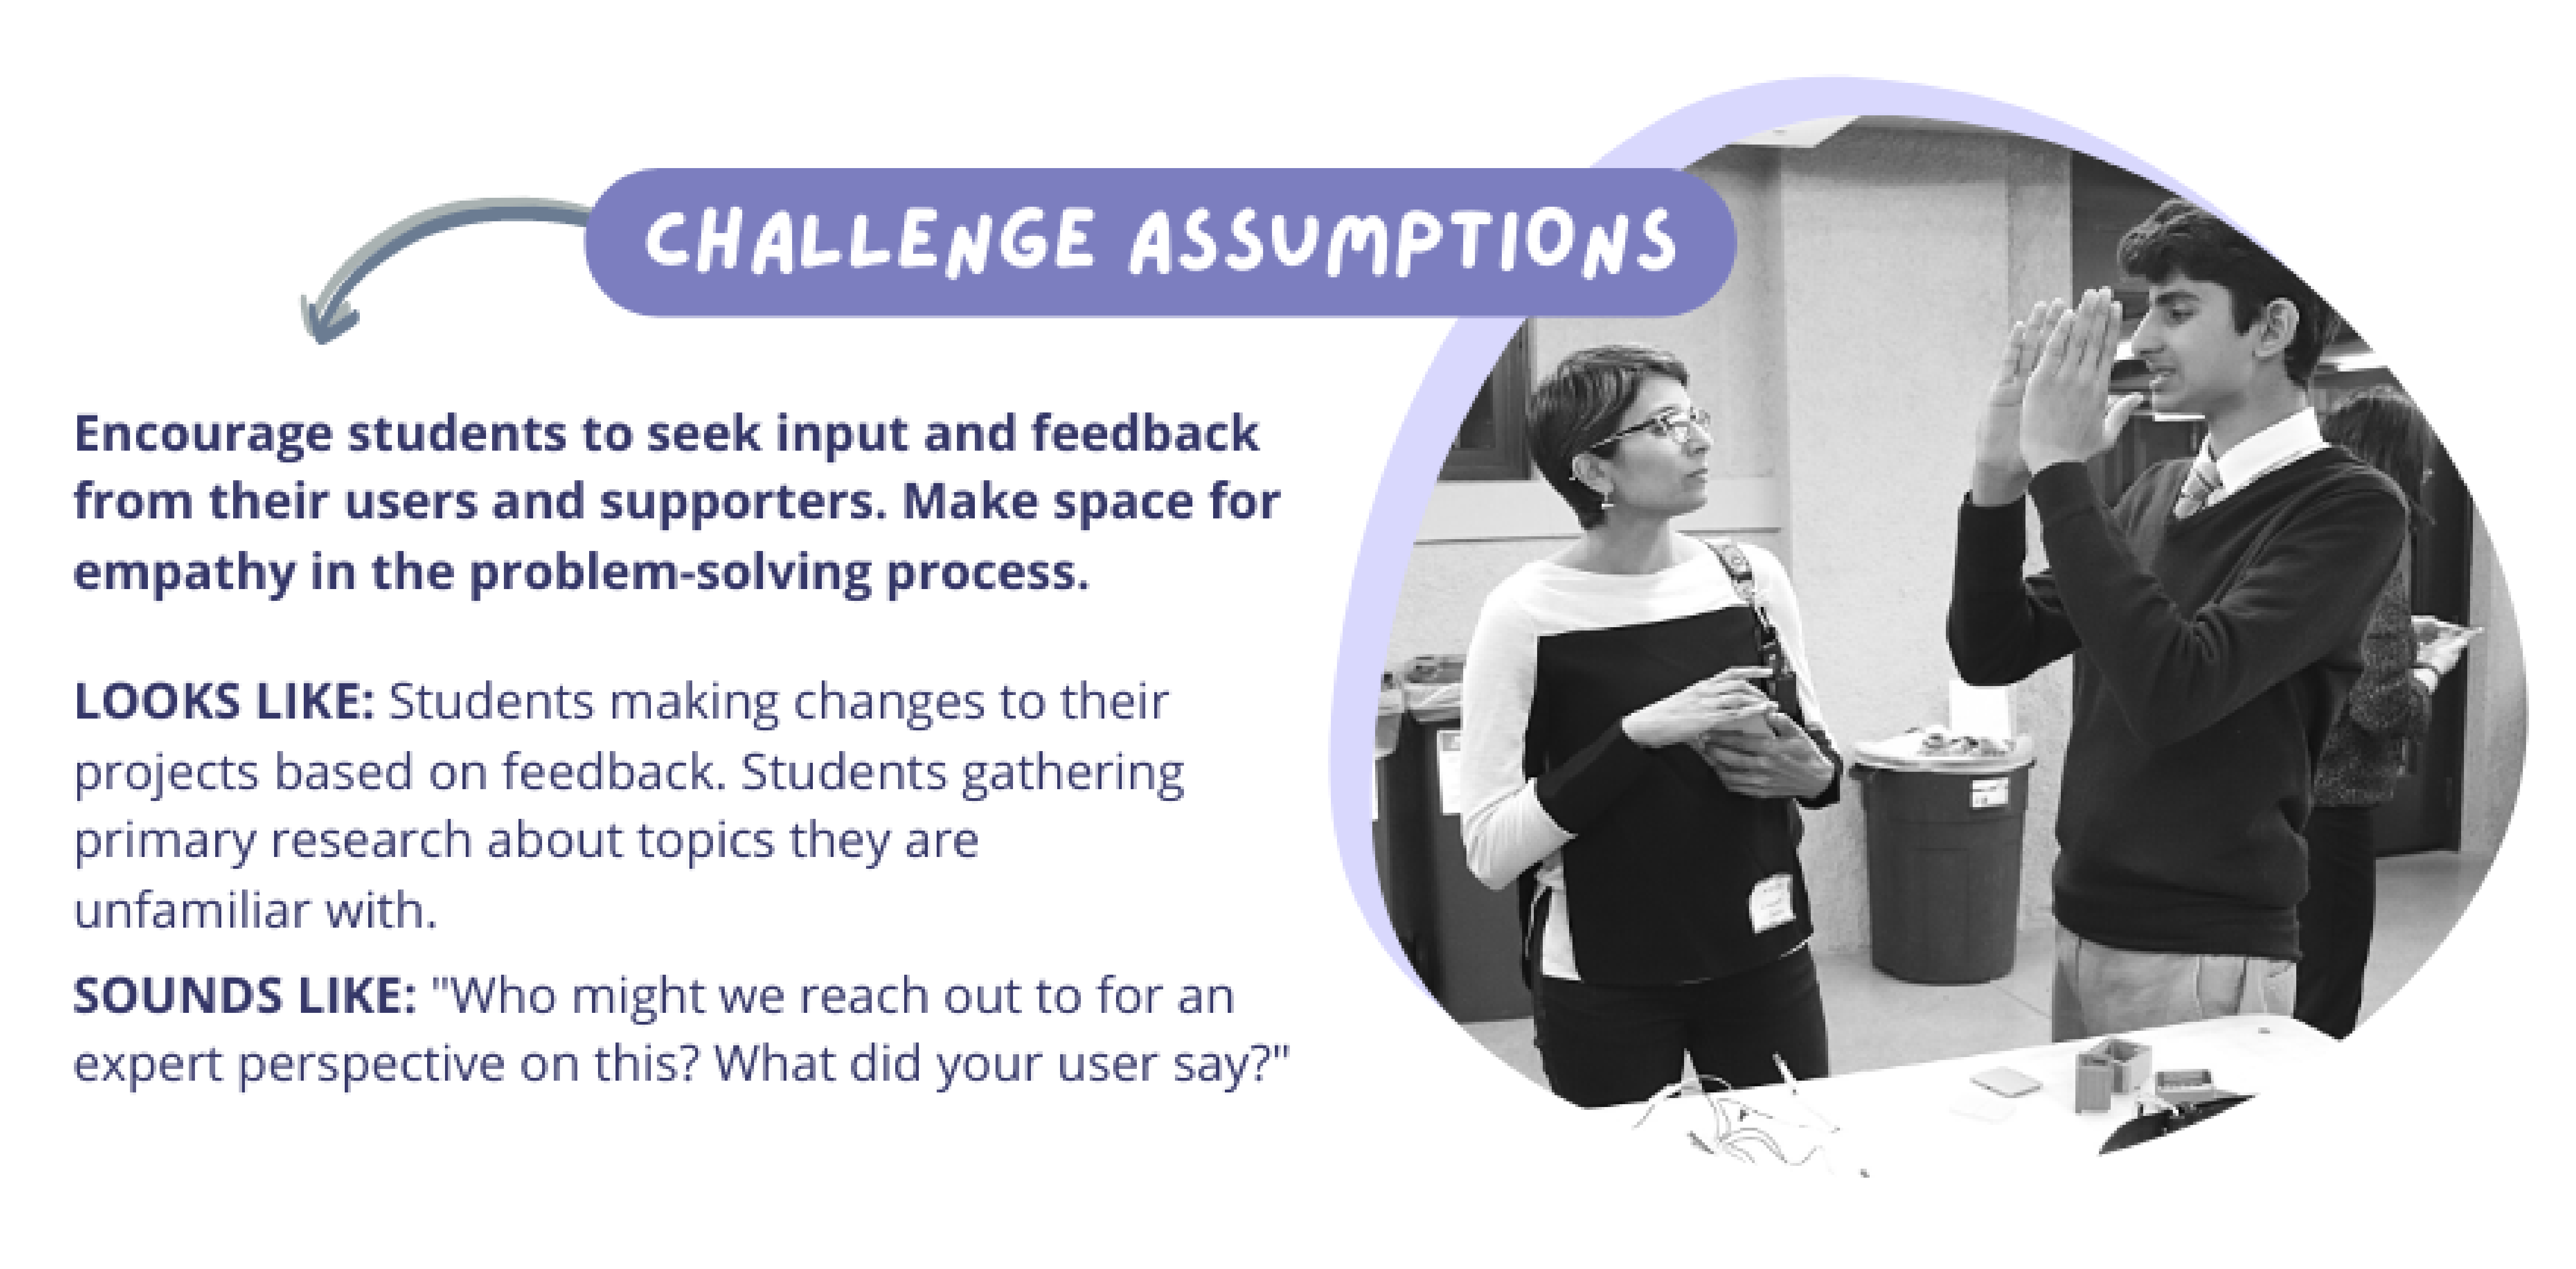 Challenge Assumptions: Encourage students to seek input and feedback from their users and supporters. Make space for empathy in the problem-solving process.